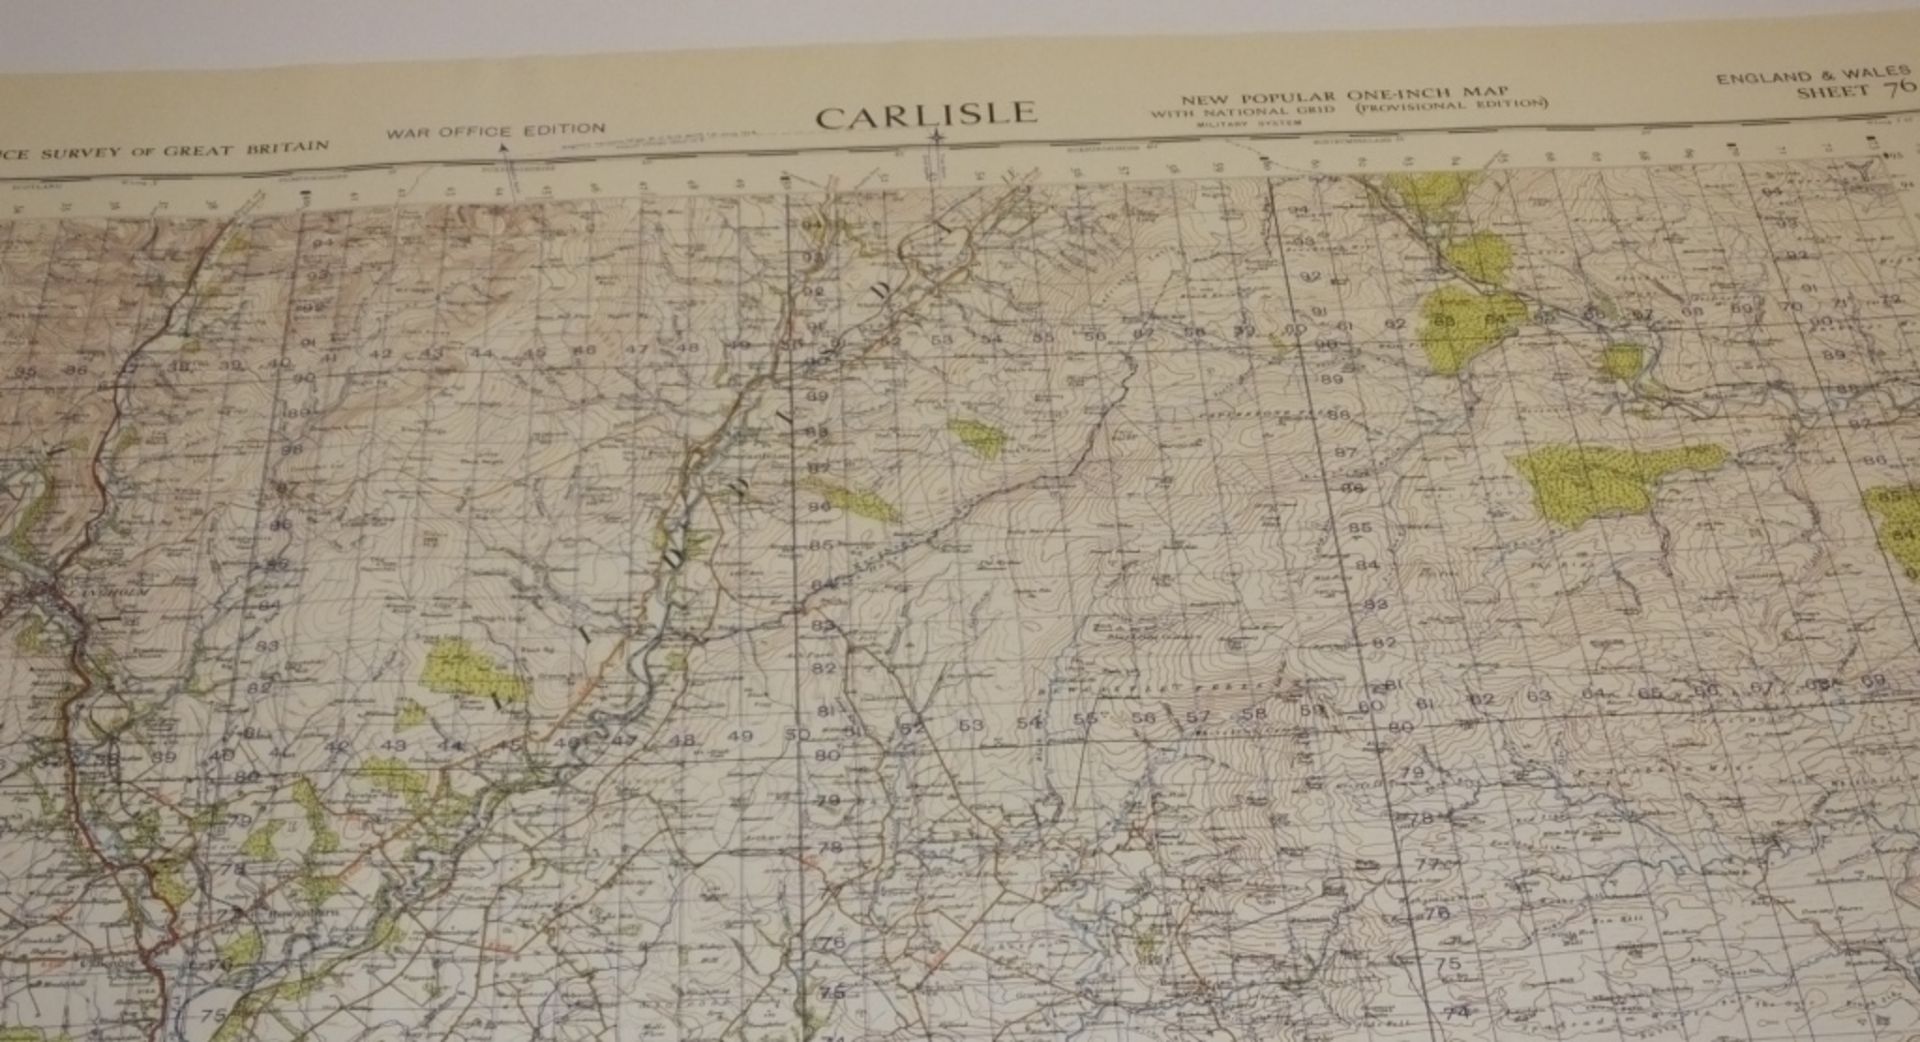 27x ENGLAND & WALES MAP CARLISLE 1INCH 1MILE 1948 PROV EDITION 4620 GSGS SHEET 76 - Image 2 of 4